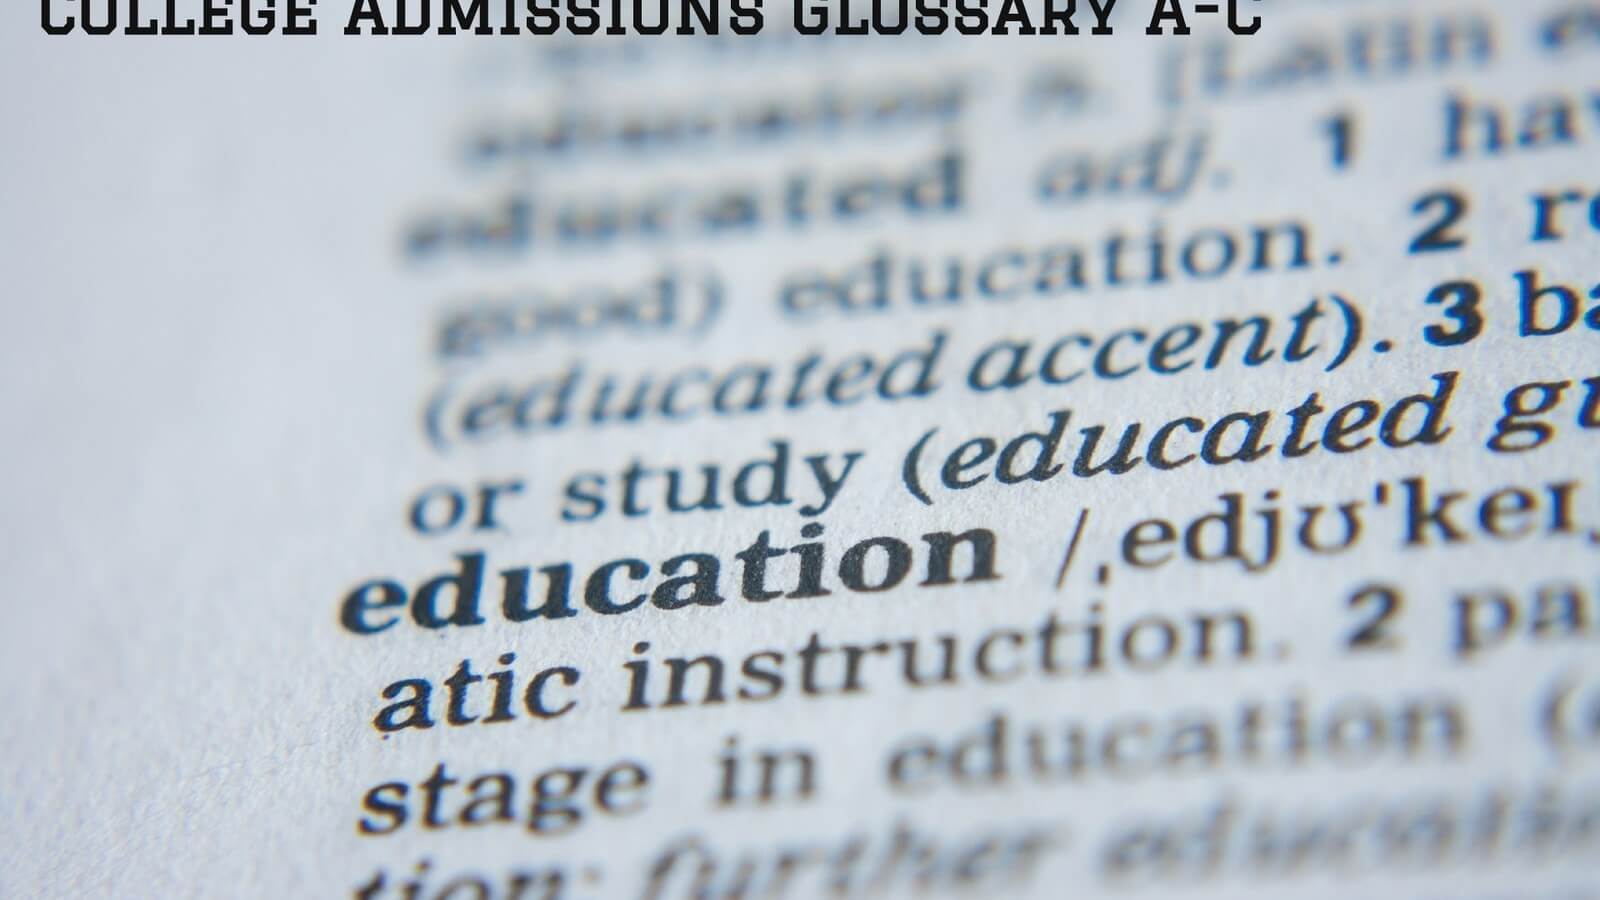 College Admissions Glossary A-C 